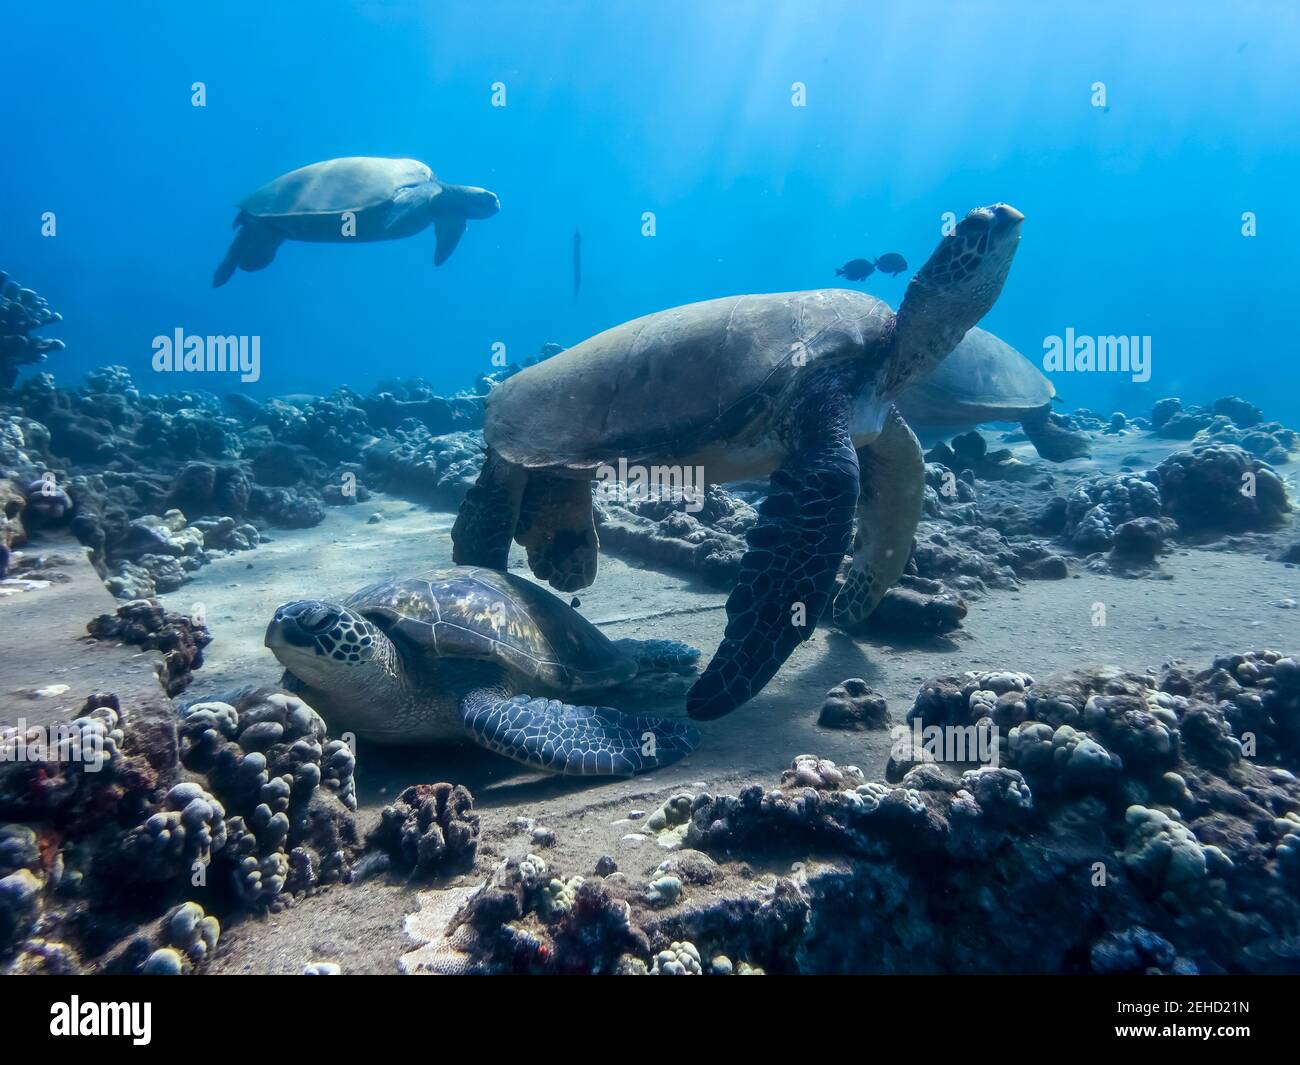 Group of sea turtles with corals and reef gathered underwater in tropics. Stock Photo